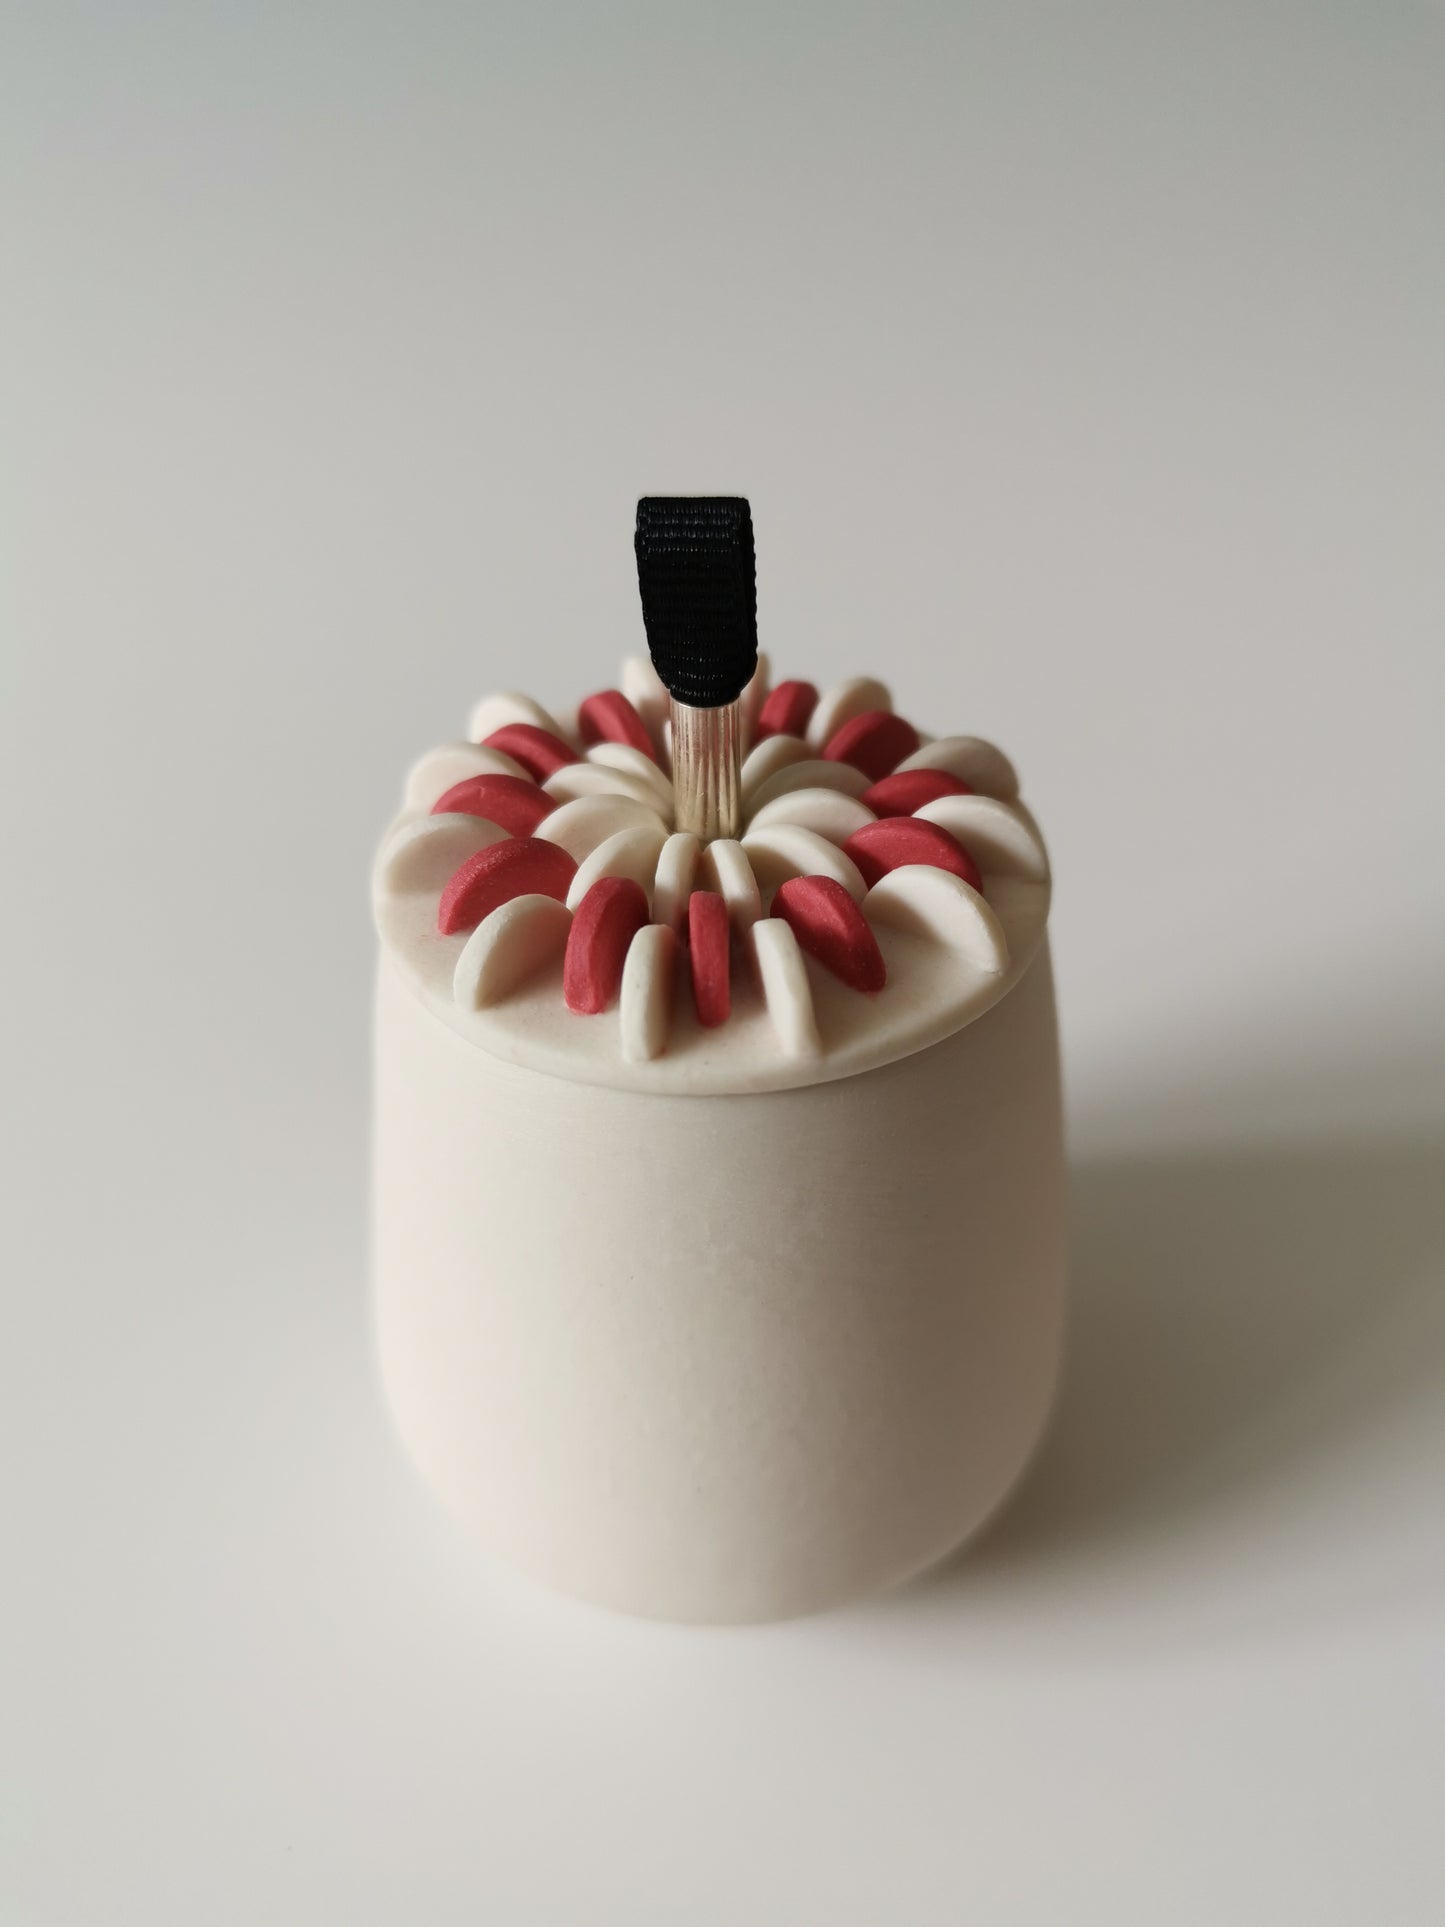 Small Red Lidded Vessel